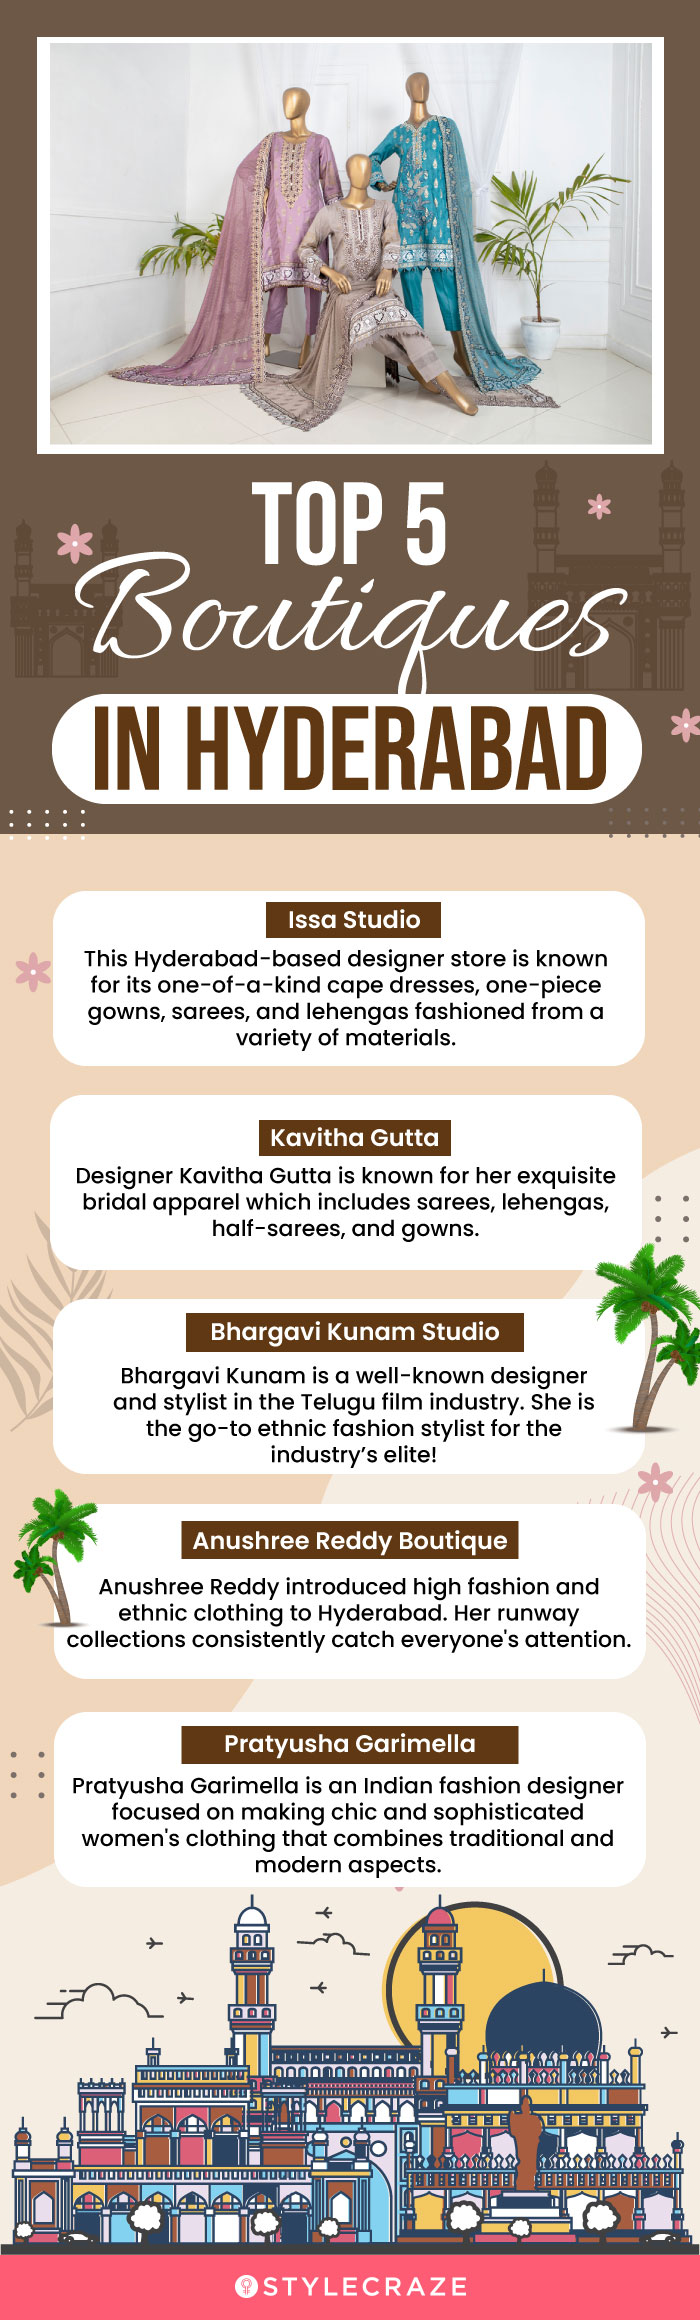 top 5 boutiques in hyderabad (infographic)